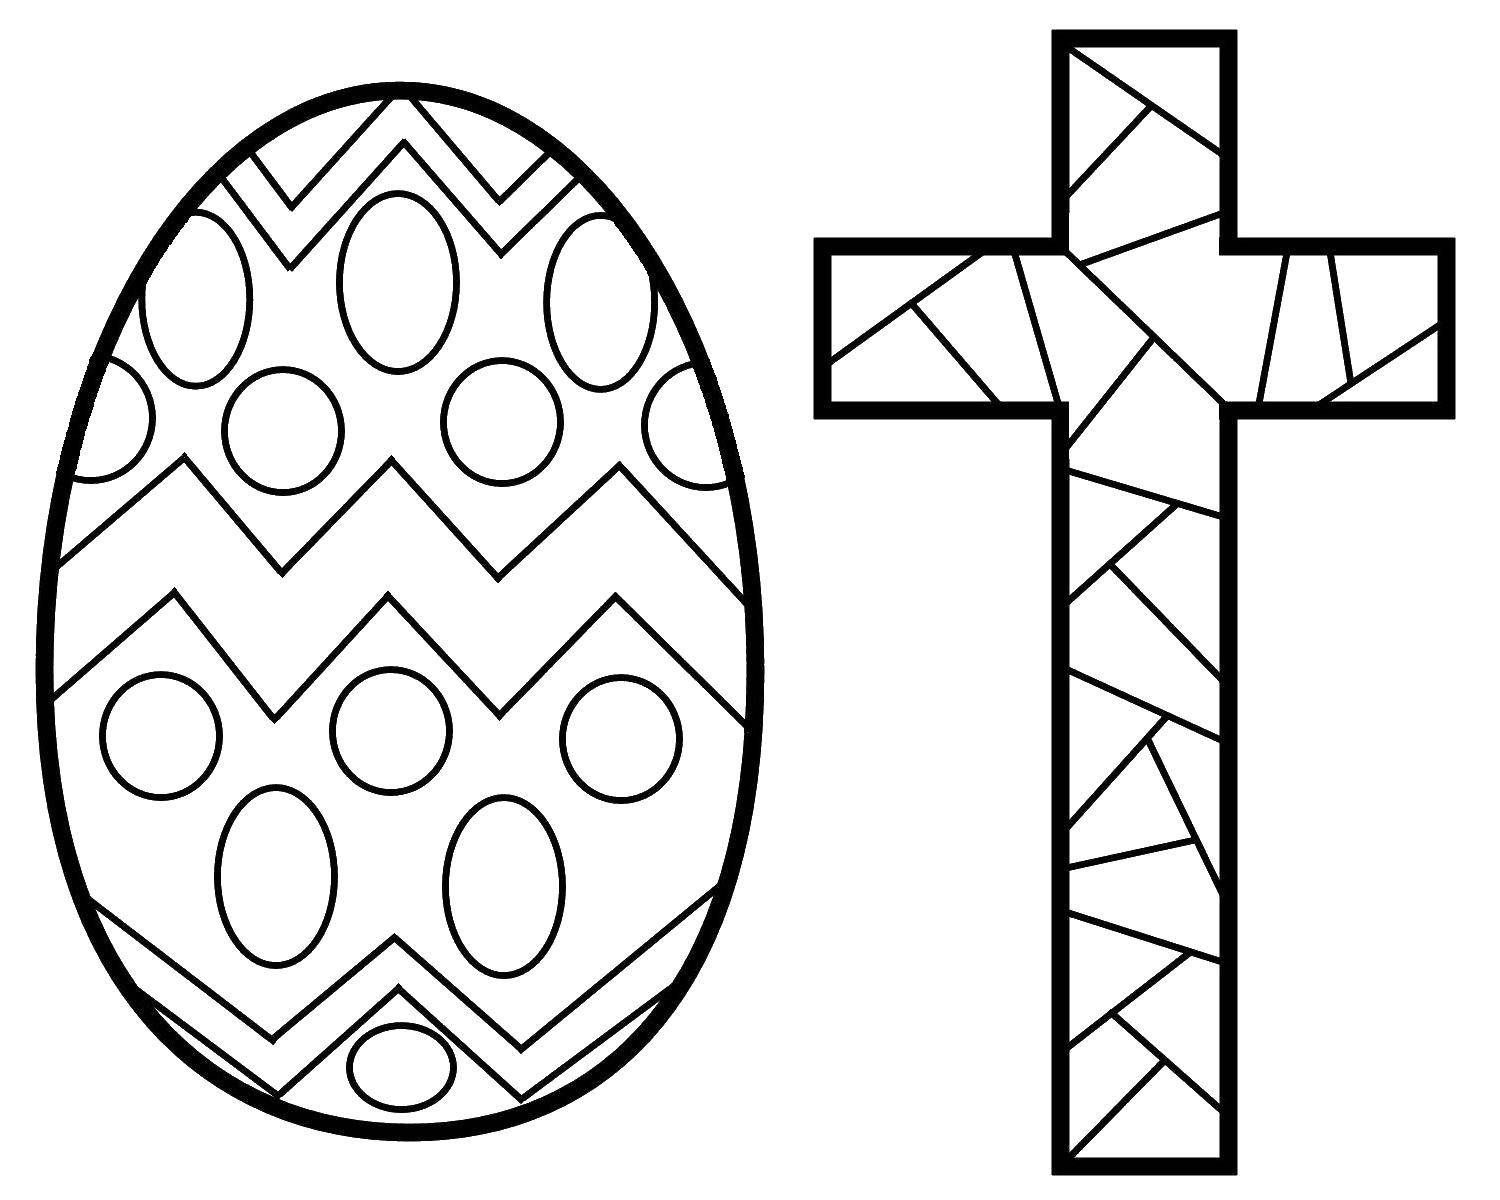 Coloring Egg and cross. Category Easter. Tags:  Easter, holiday, egg, cross.